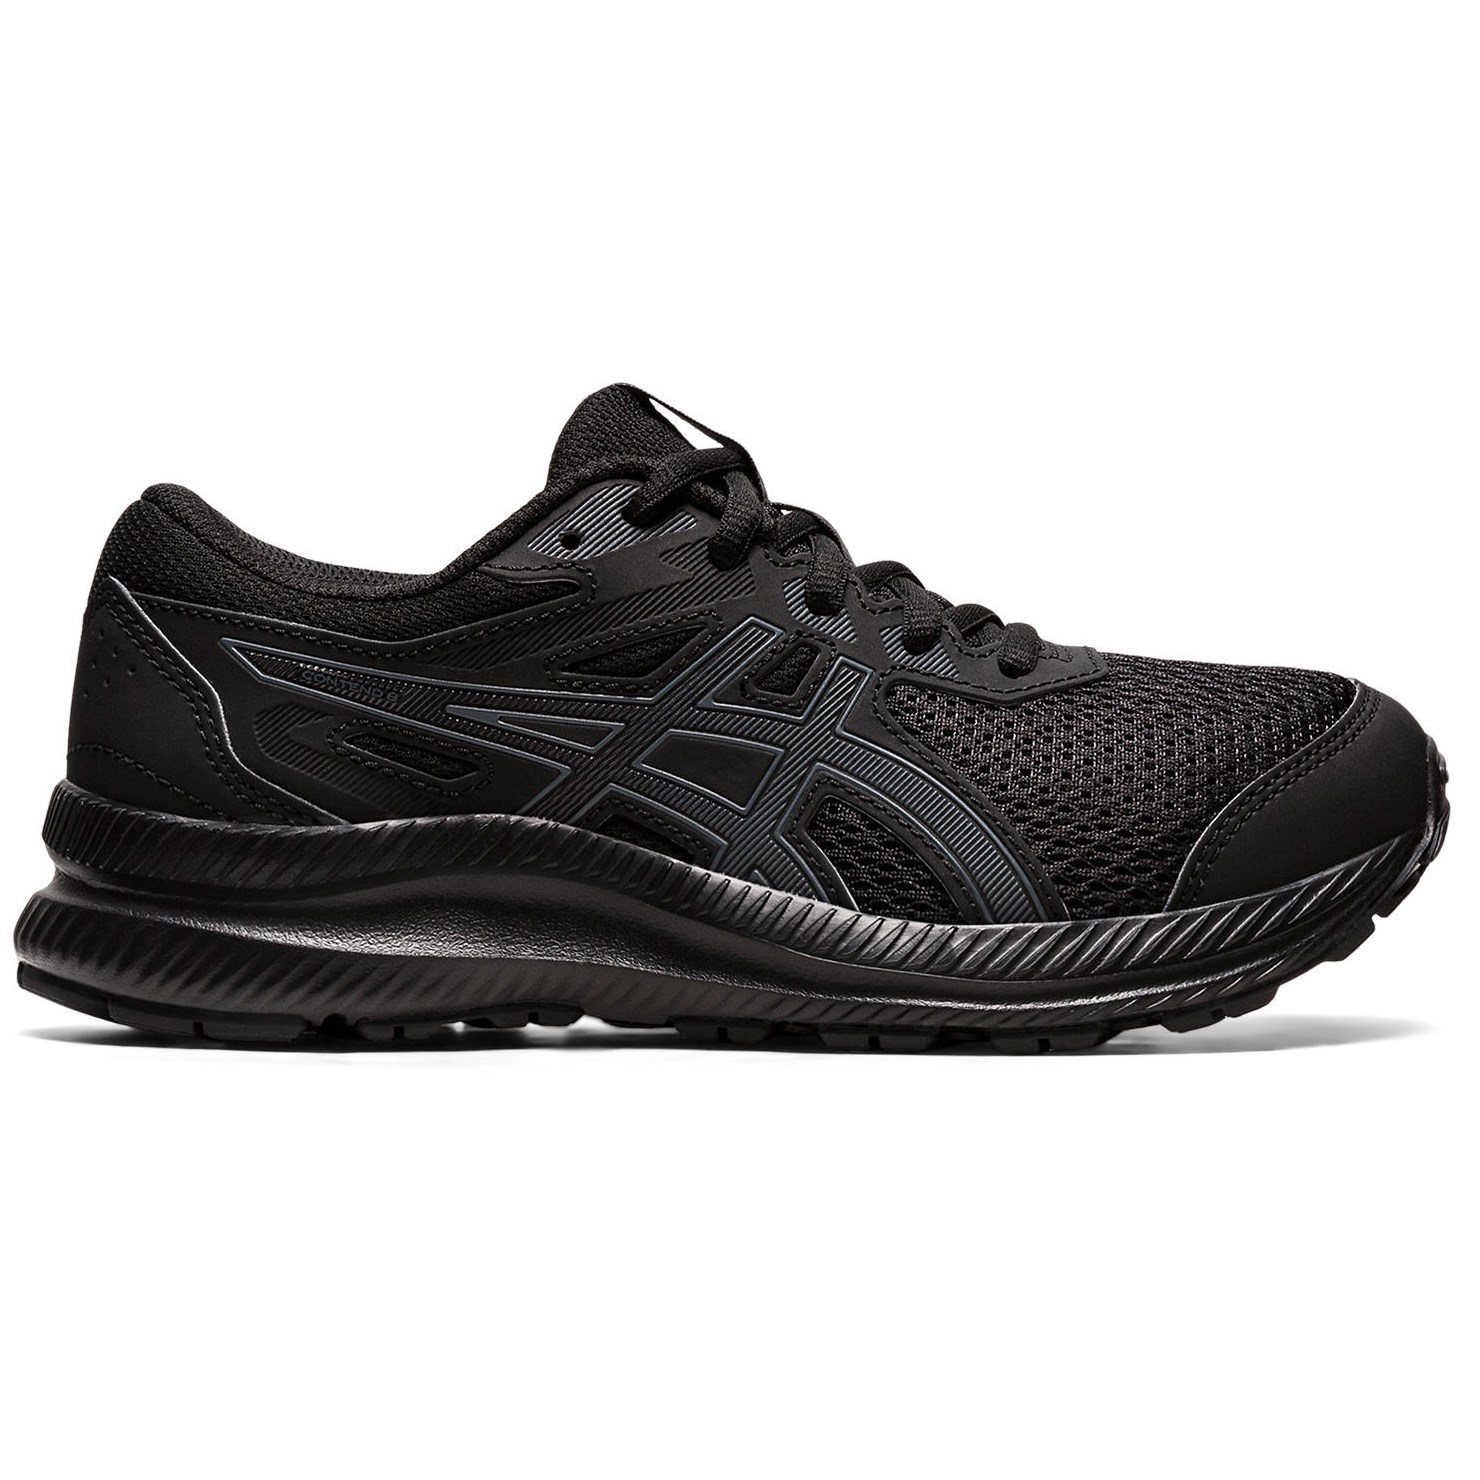 Asics Contend 8 GS - Kids Running Shoes - Black/Carrier Grey | Sportitude